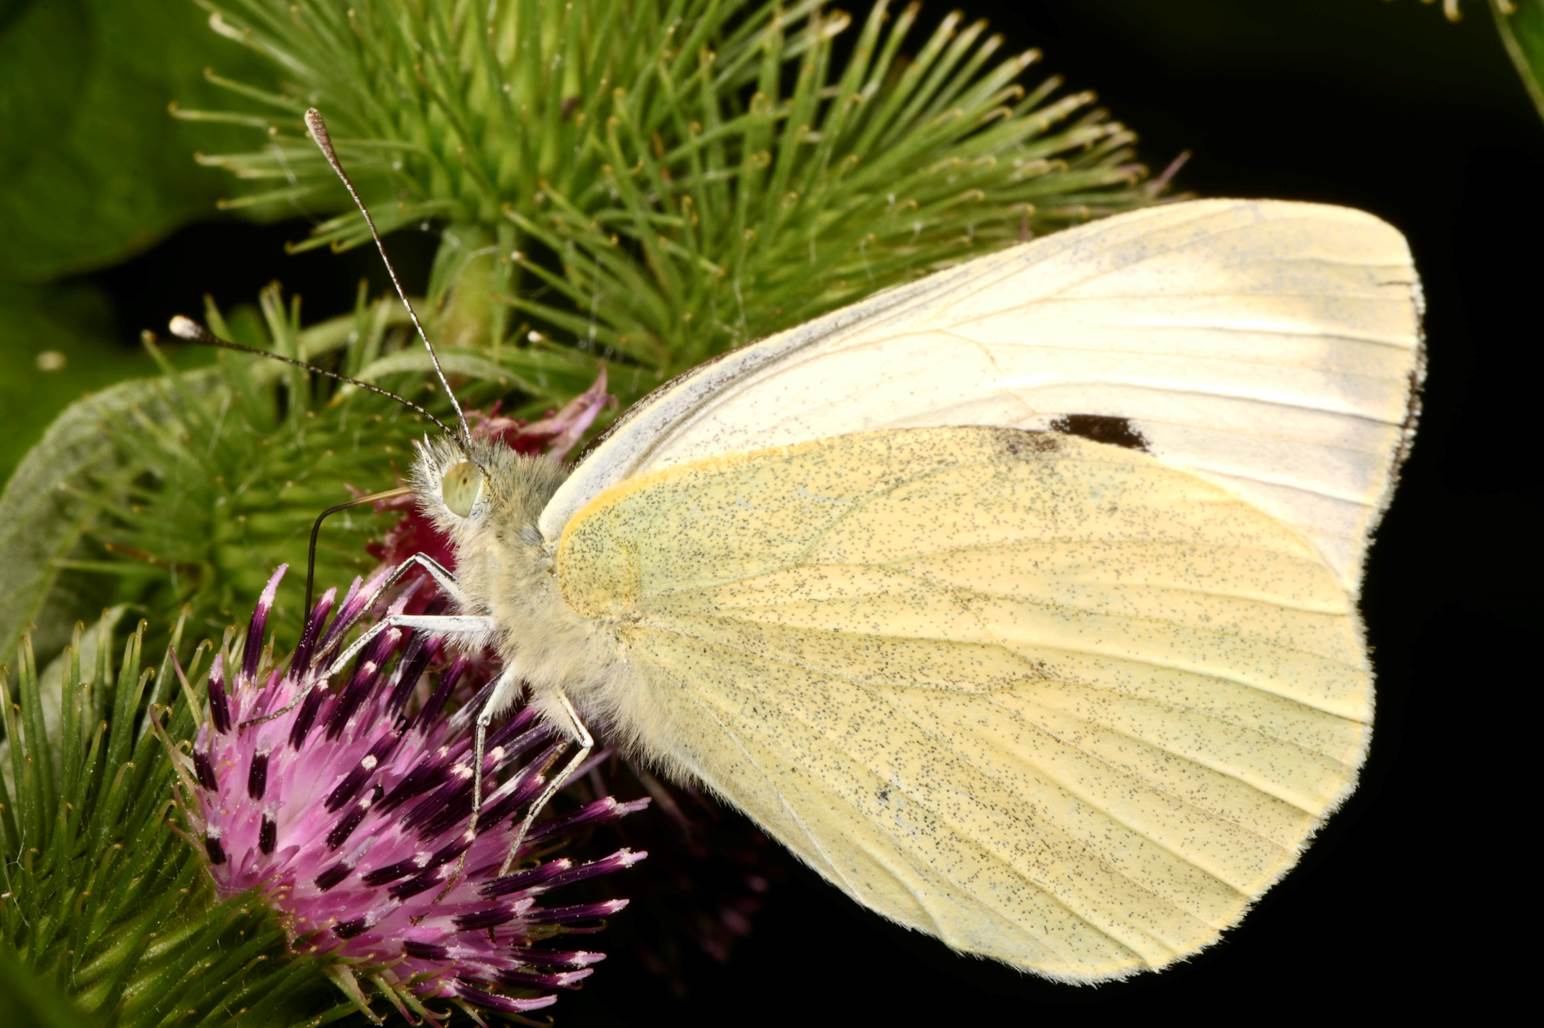 A white moth on a flower

Description automatically generated with low confidence